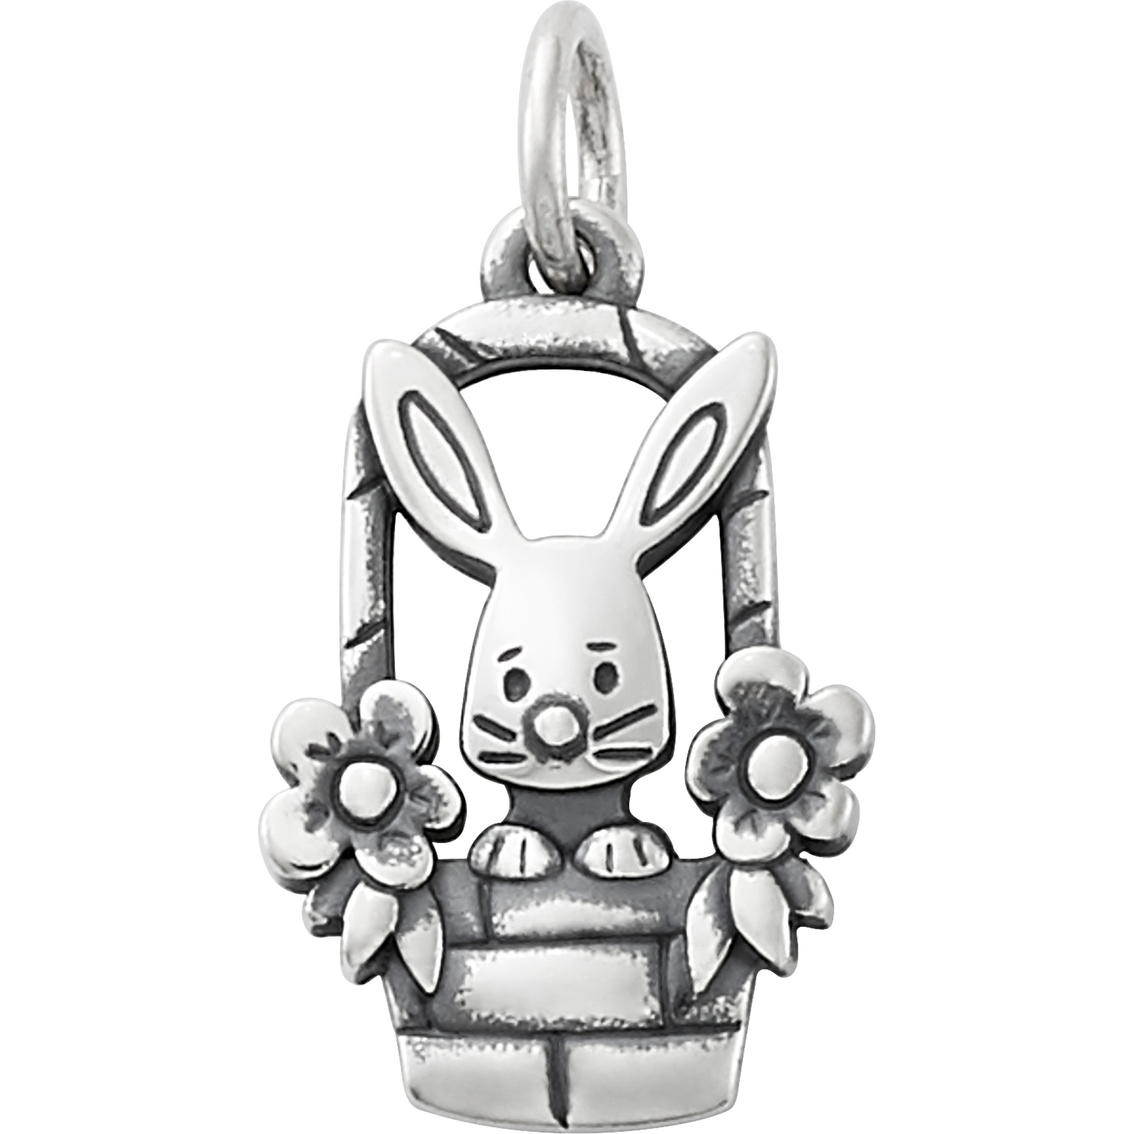 James Avery Artisan Jewelry - Colorful Easter charms are the